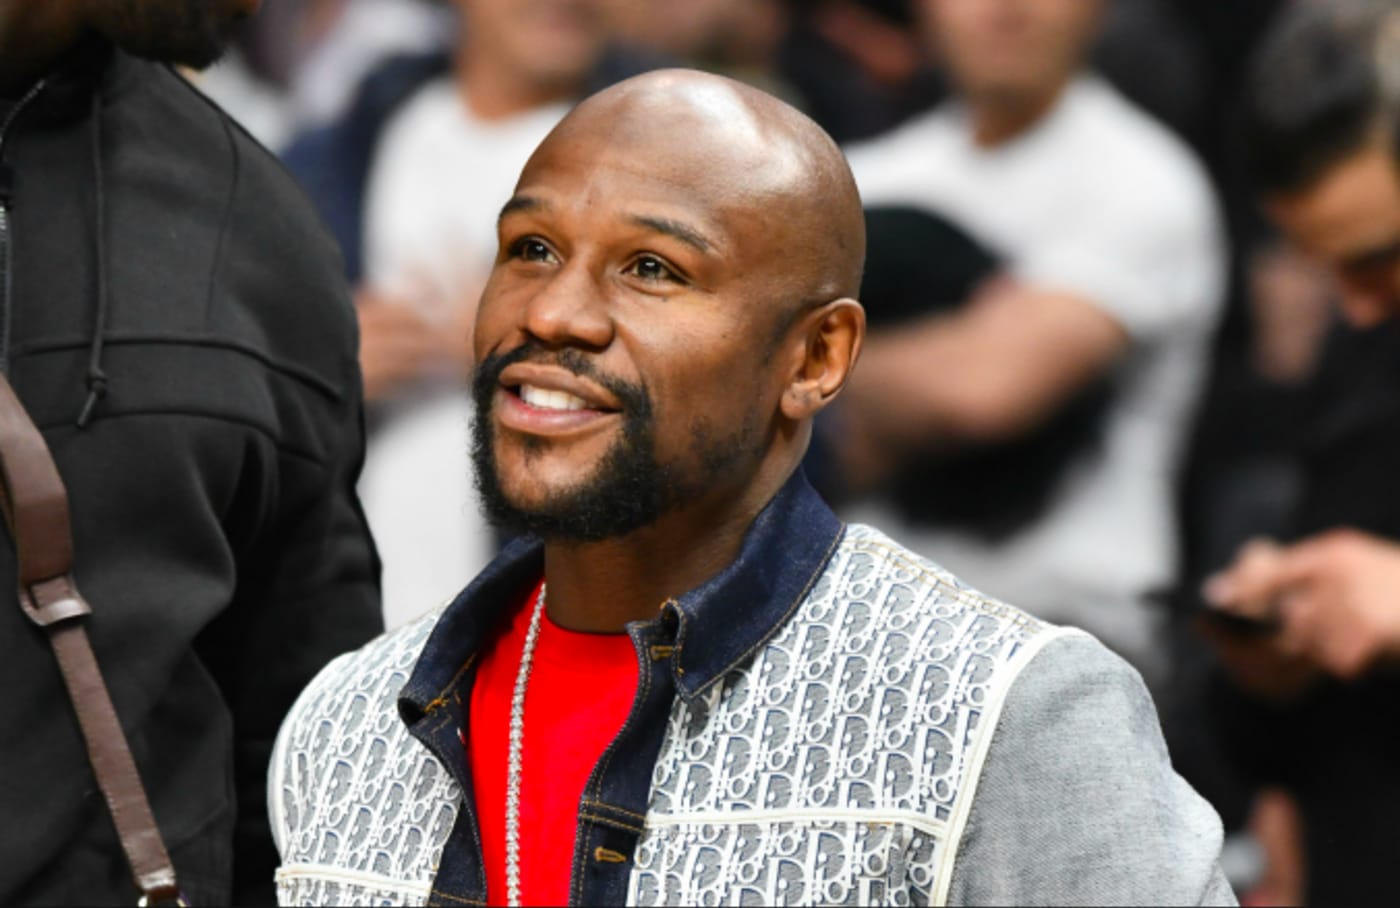 Floyd Mayweather Jr. attends a basketball game